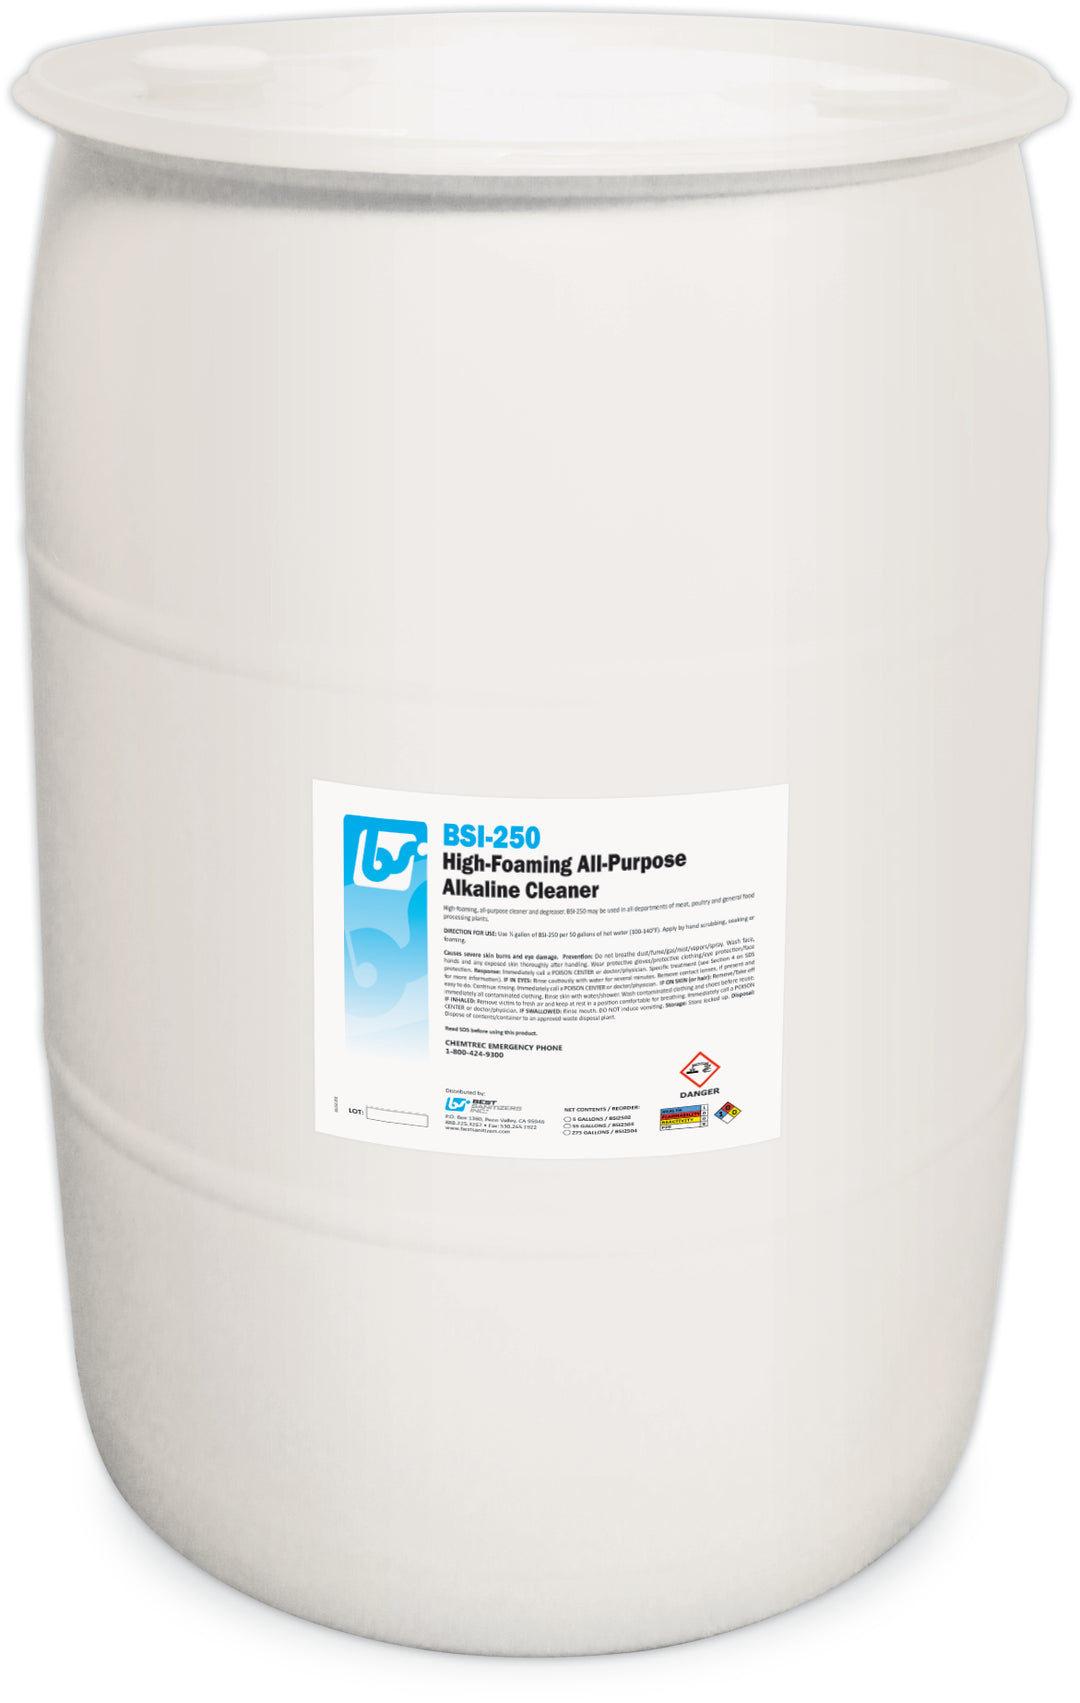 A 55 Gallon Drum of BSI-250 High-Foaming All-Purpose Alkaline Cleaner.